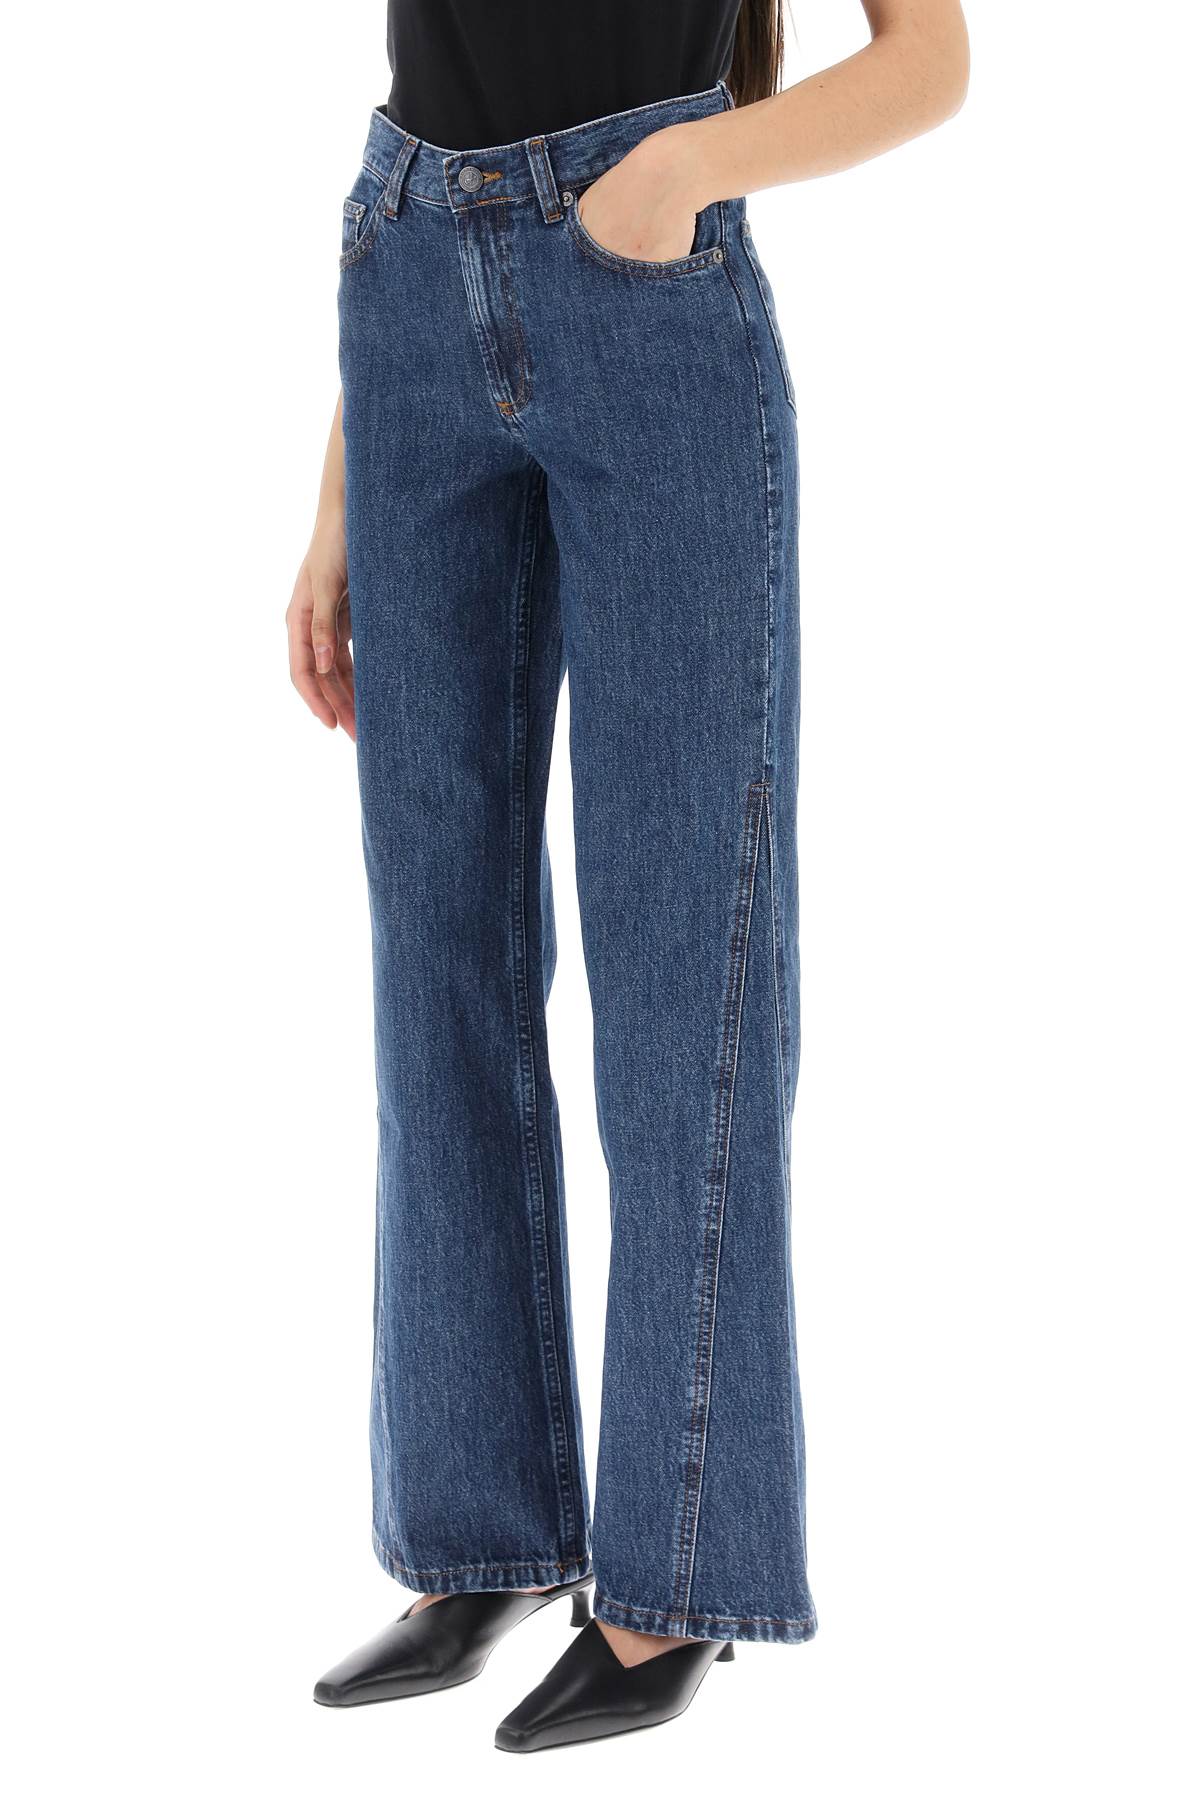 A.p.c. 'elle' flared jeans